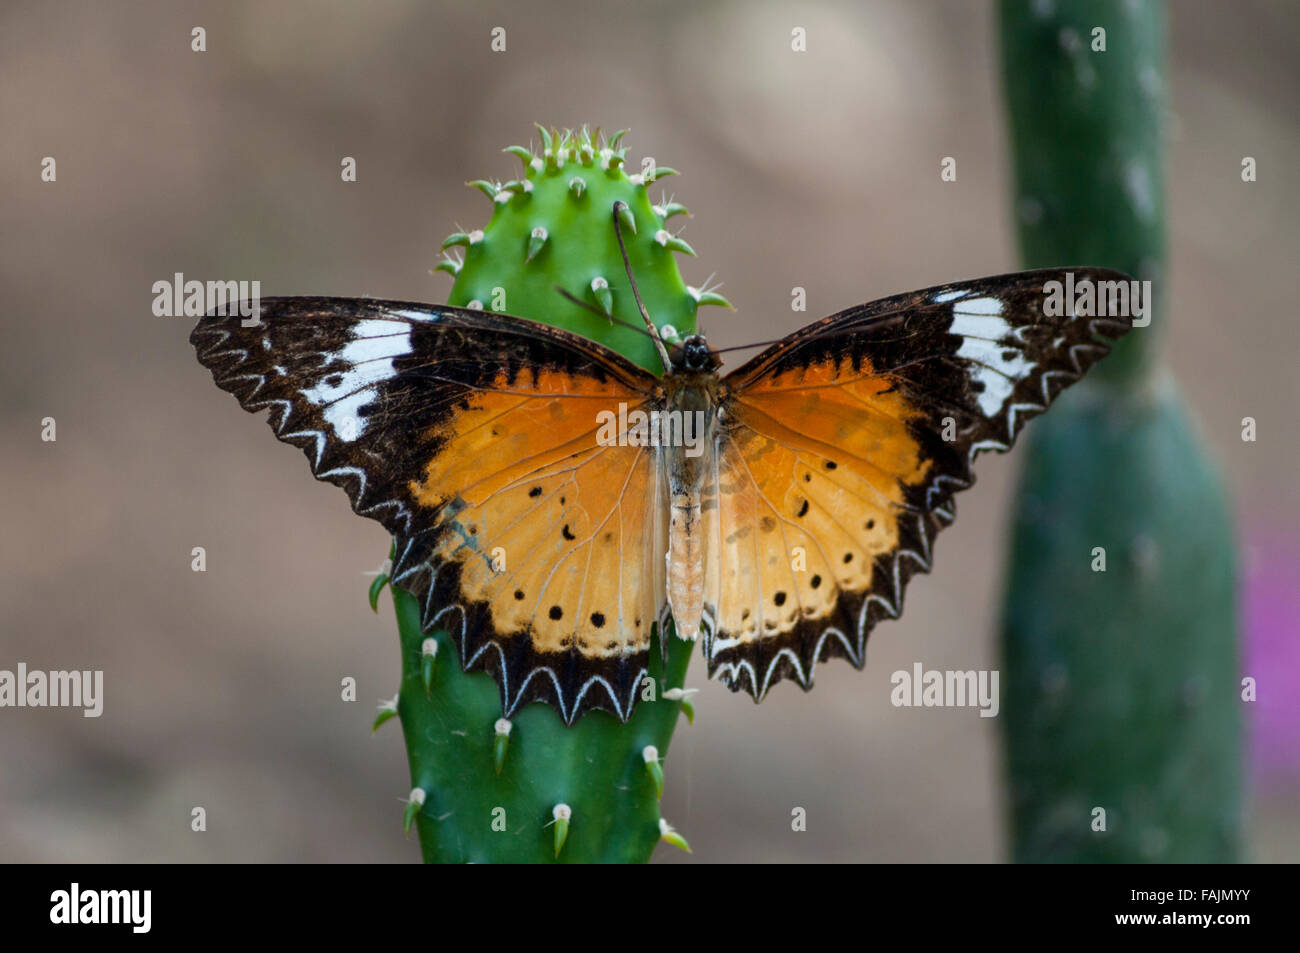 Plain tiger butterfly (Danaus chrysippus), also known as African monarch butterfly, on a cactus in Myanmar. Stock Photo